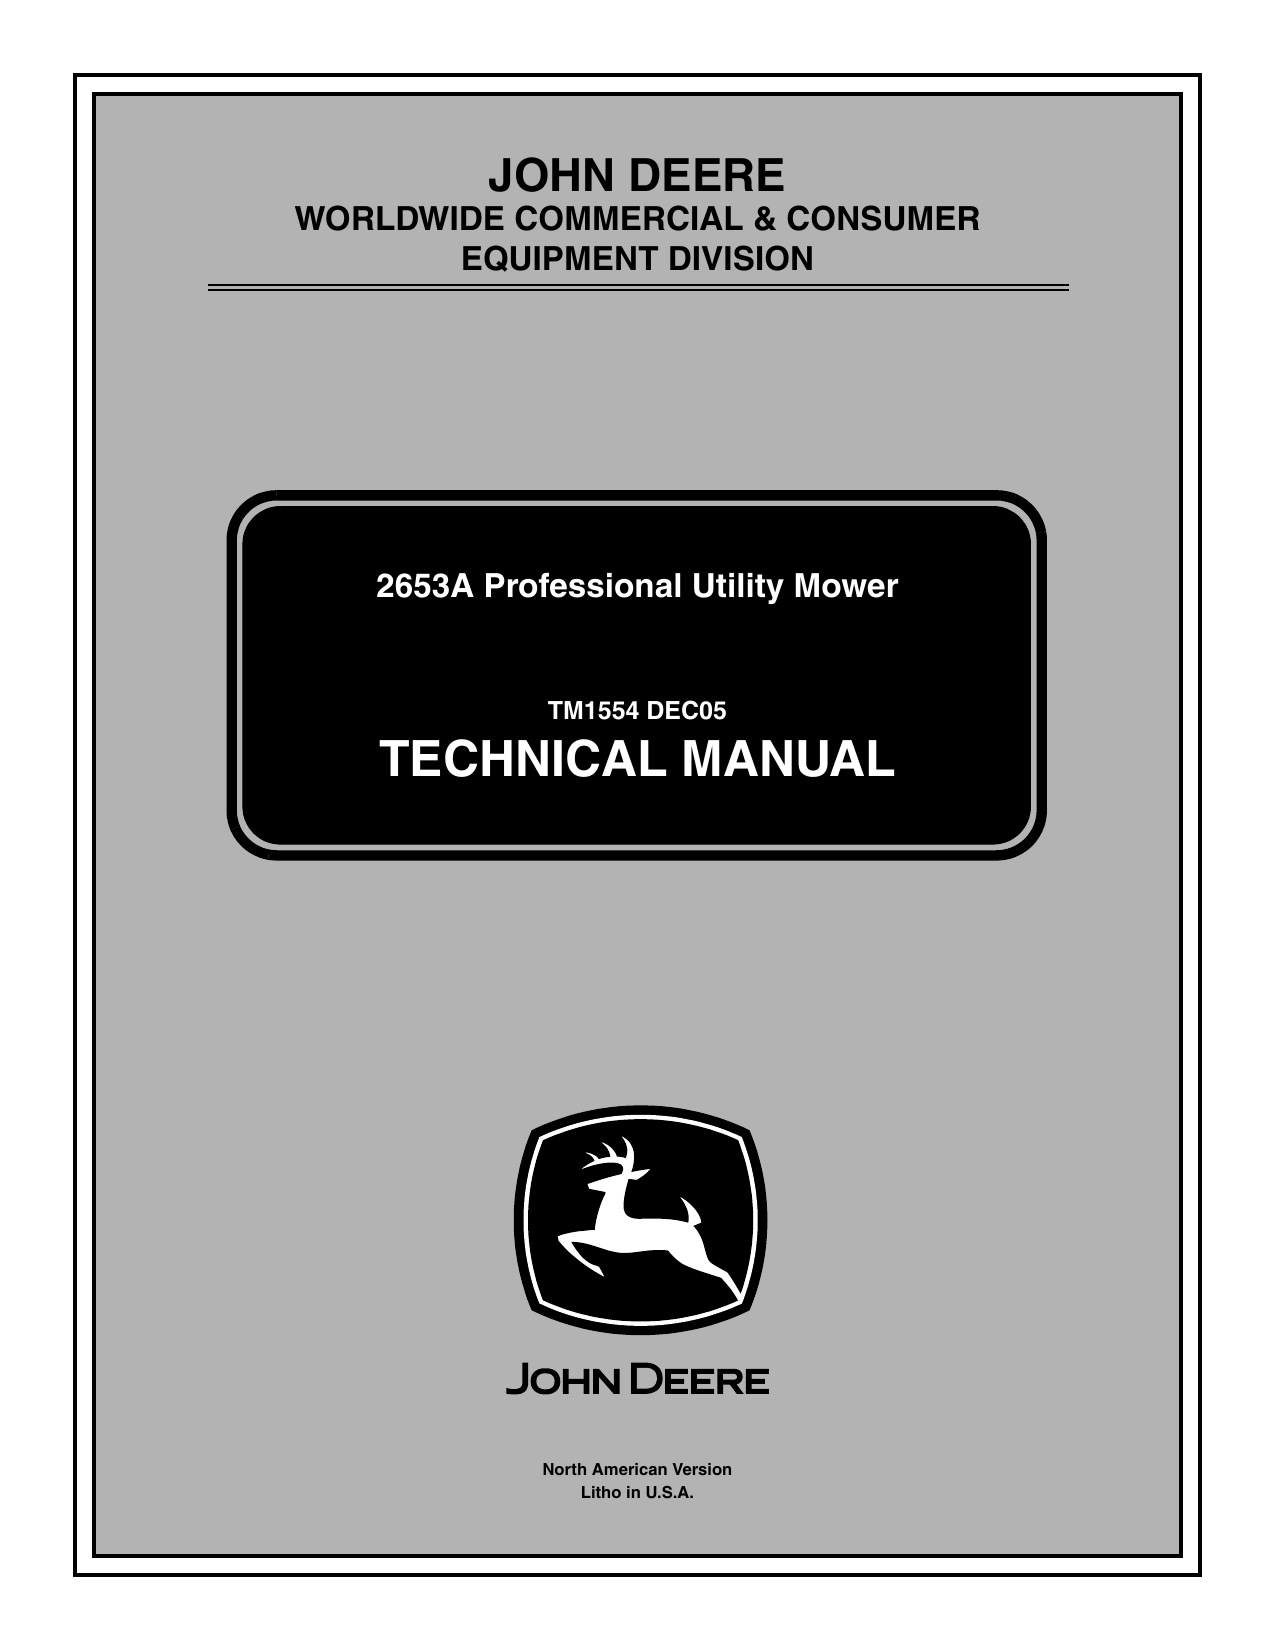 John Deere 2653A utility mower service technical manual Preview image 1